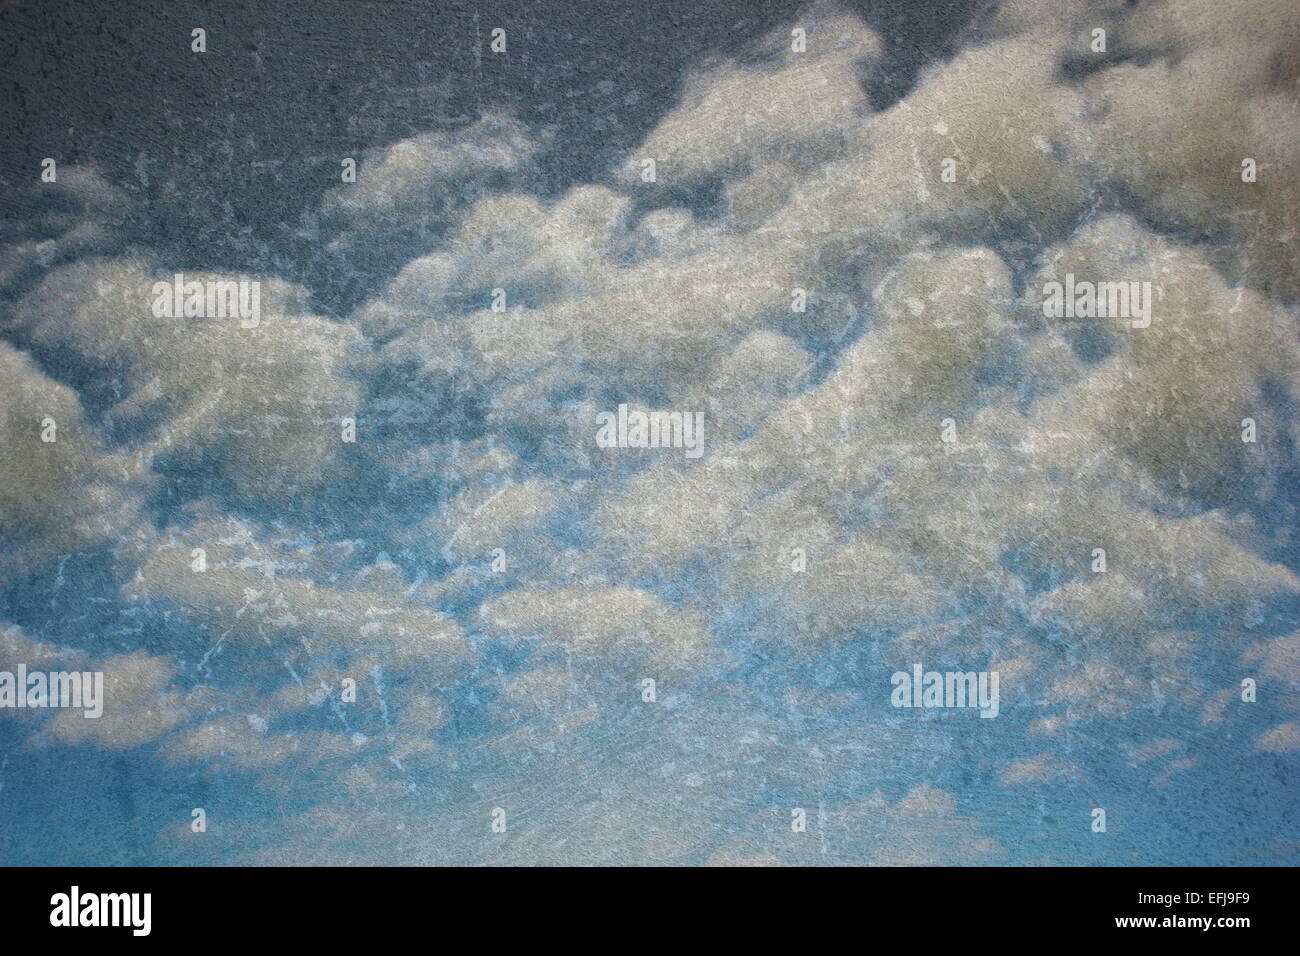 beautiful sky backdrop over cracked surface, grungy pattern Stock Photo